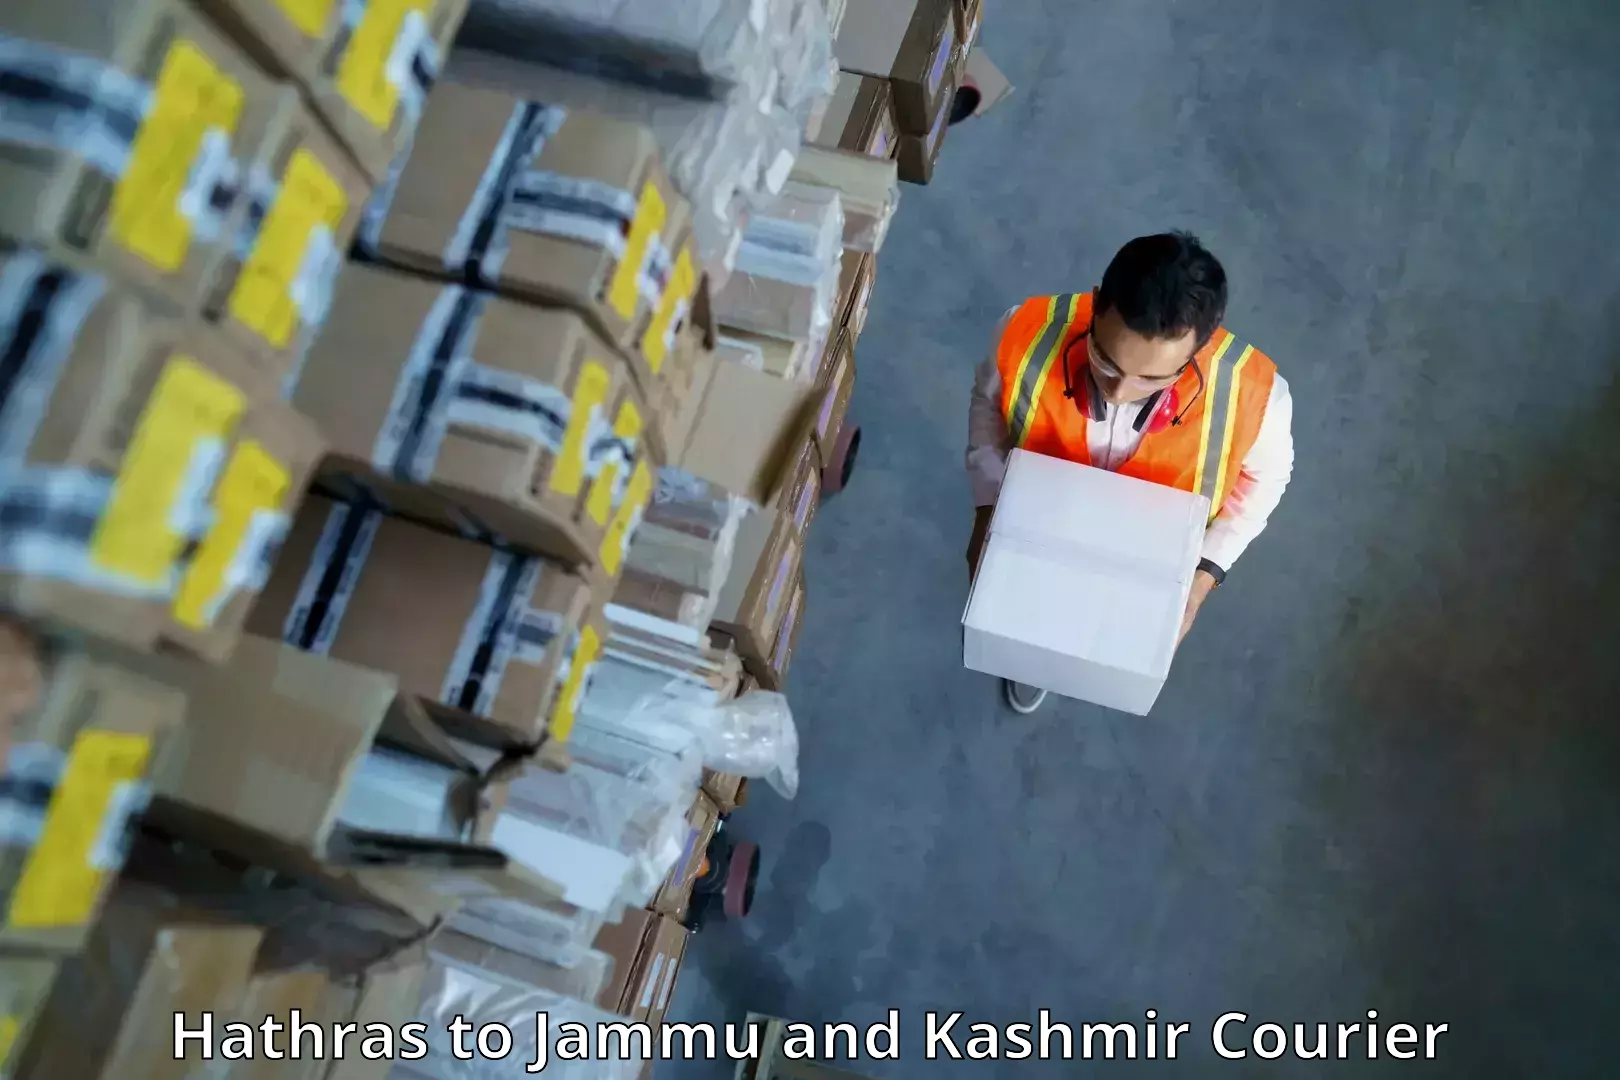 International courier networks Hathras to Jakh